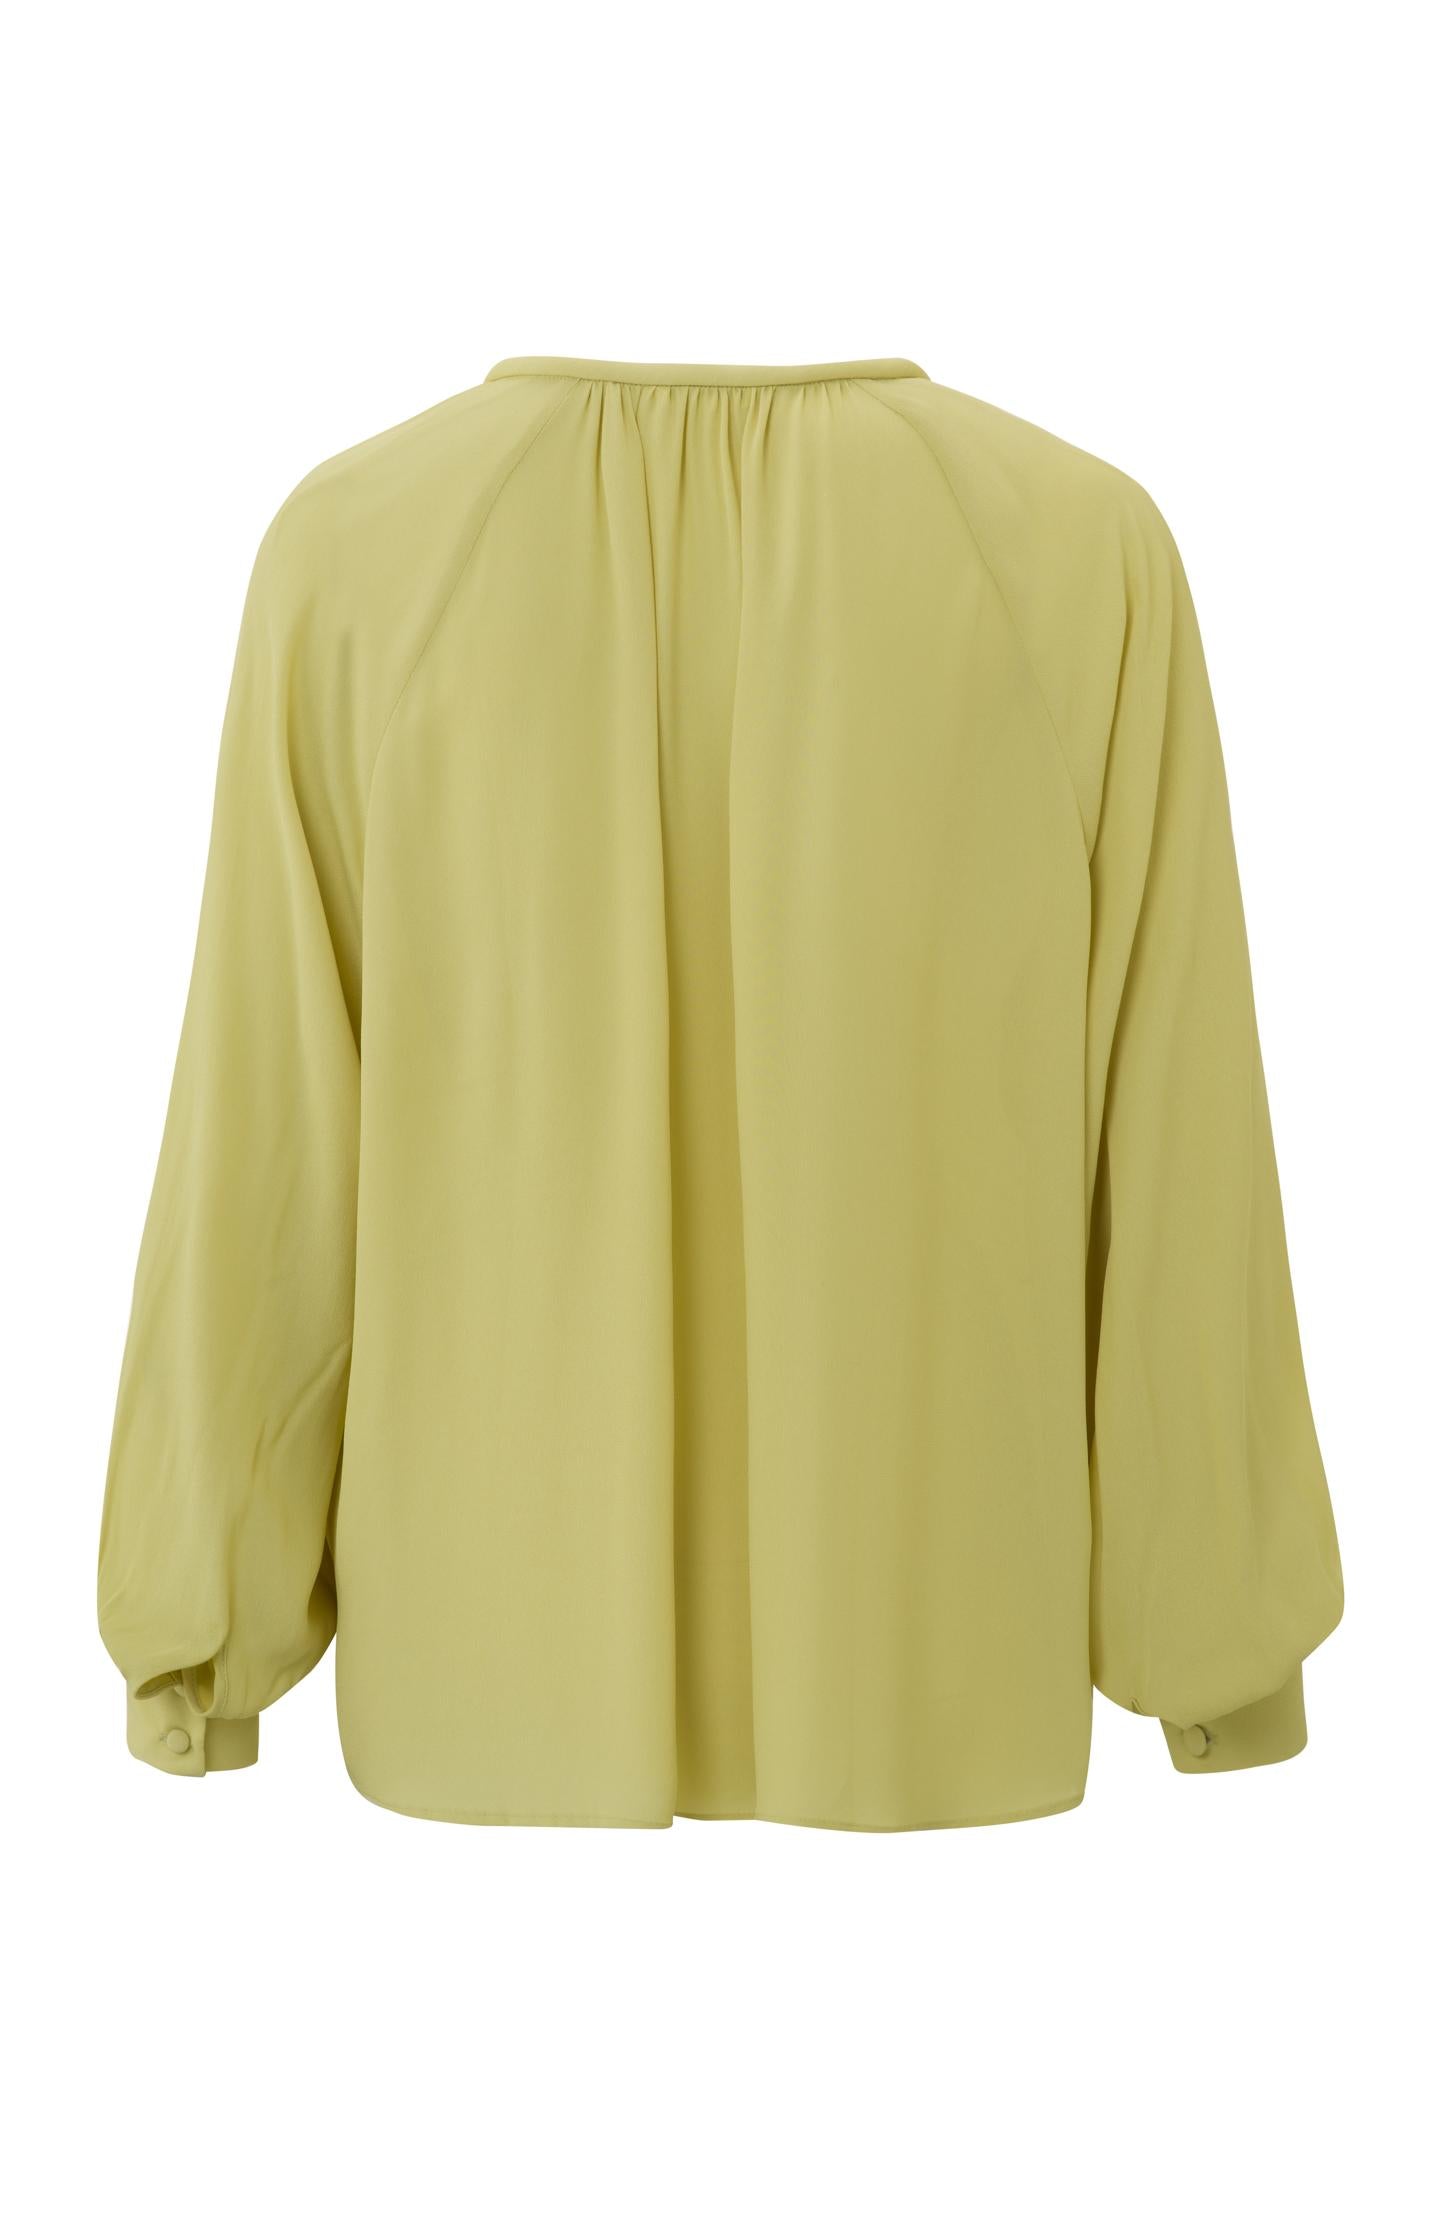 Top with V-neck, long balloon sleeves and pleated details